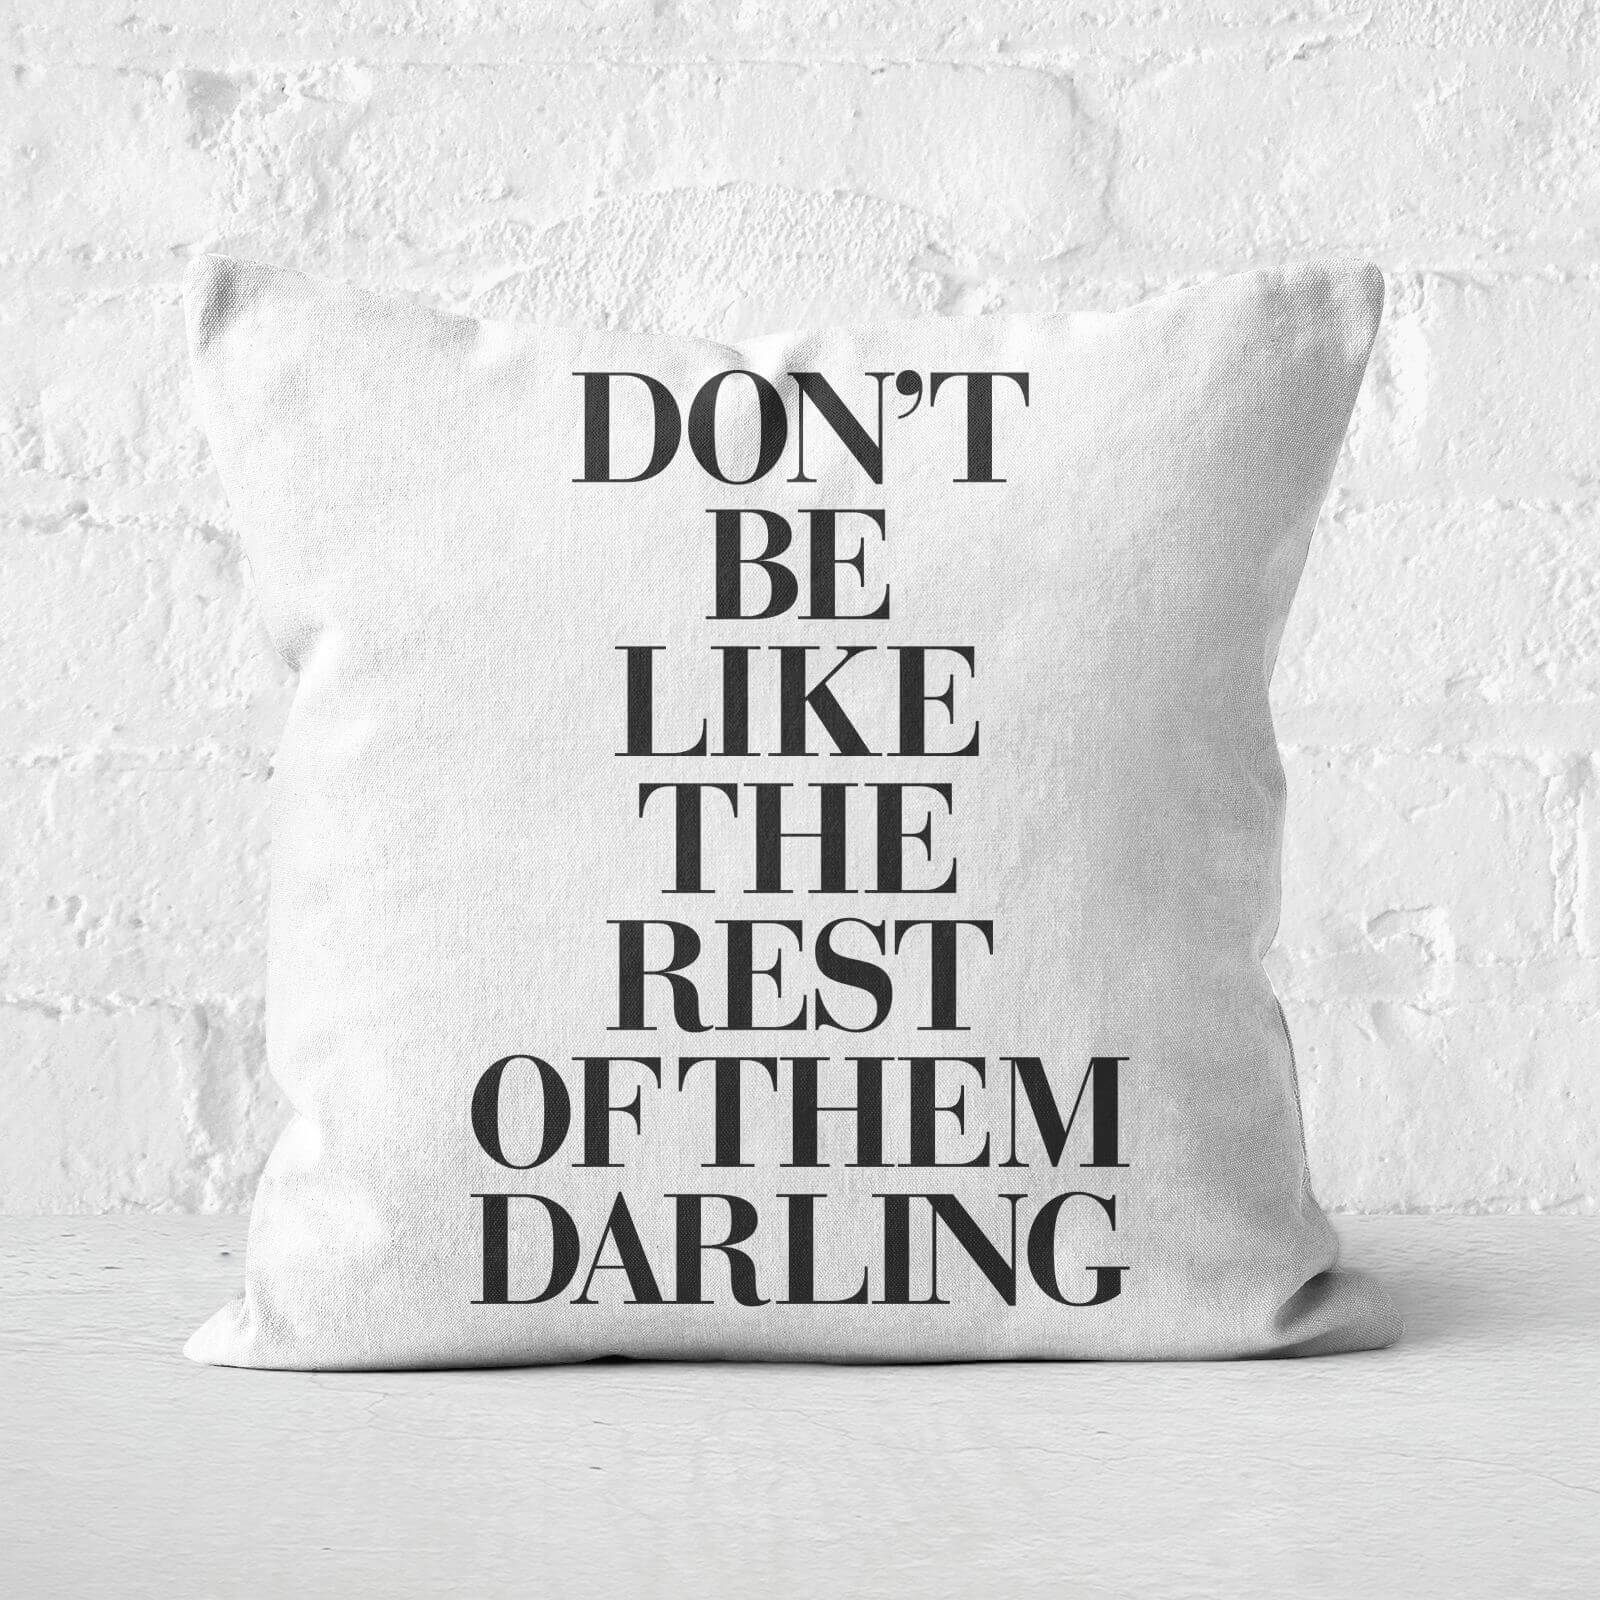 The Motivated Type Don't Be Like The Rest Of Them Darling Square Cushion - 60x60cm - Soft Touch